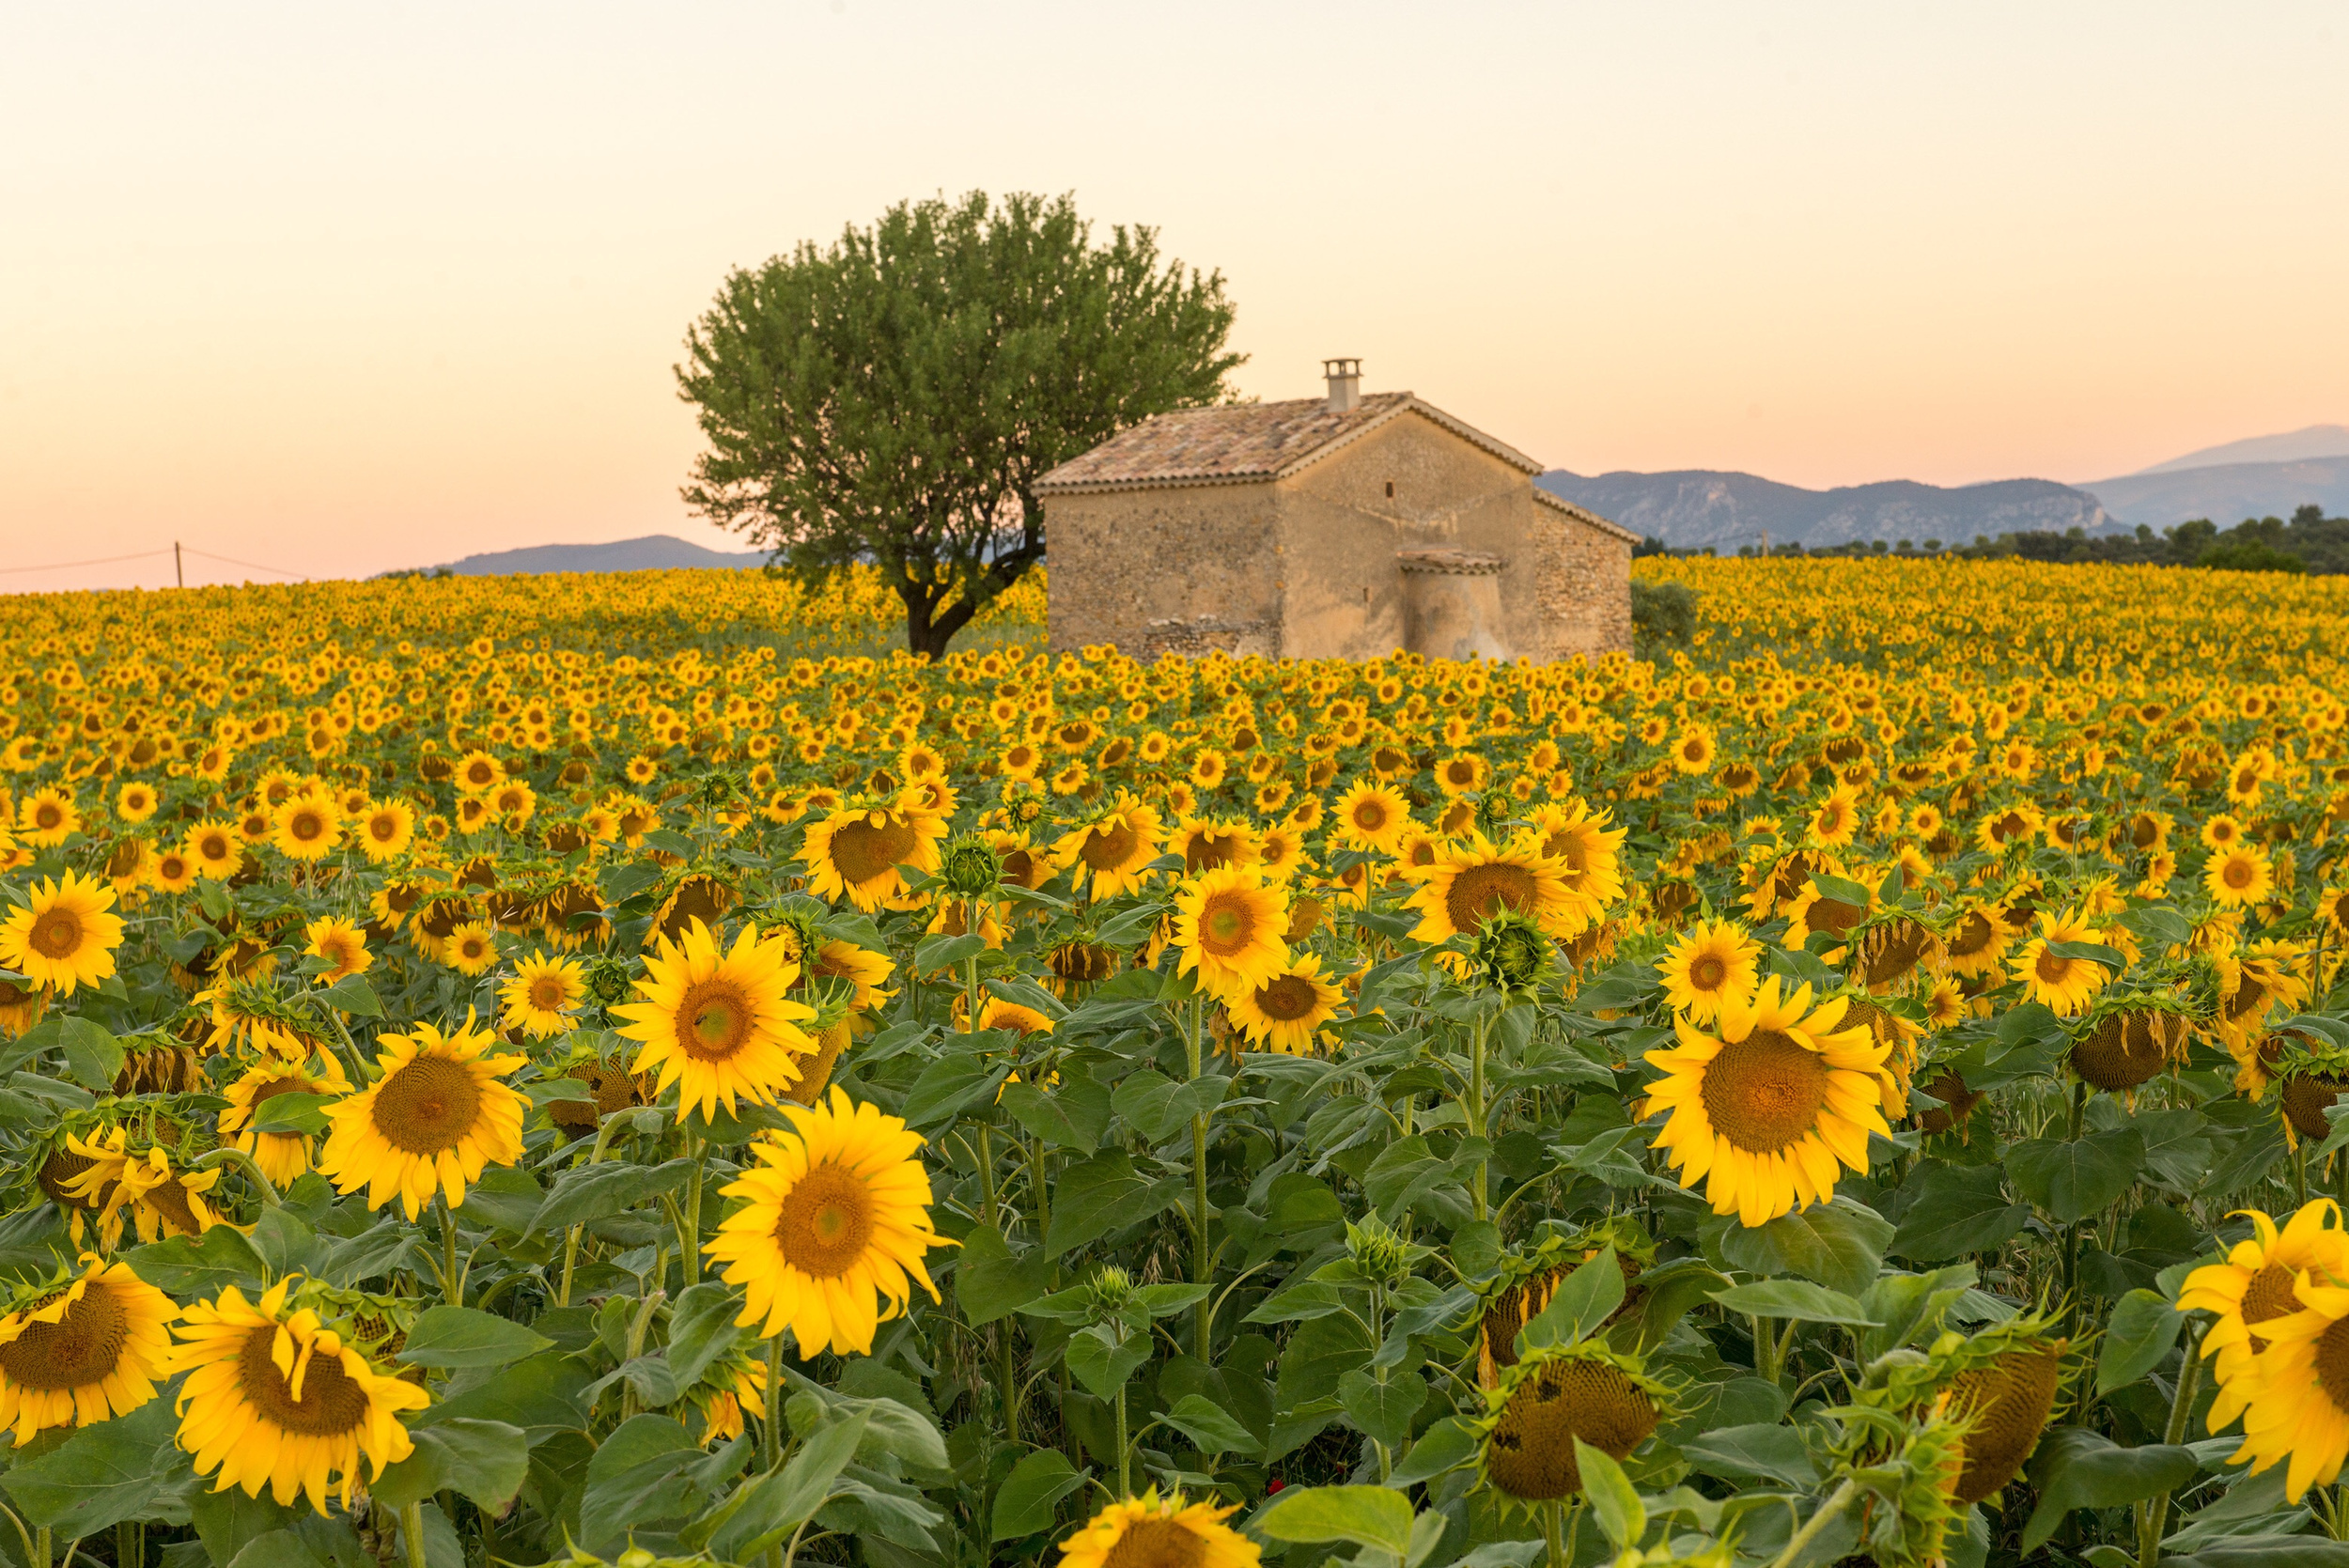 <p>The Dordogne region of France is located in the rural southwest. And driving (or taking the train) through the area during May and June means hundreds of acres of sunflowers will greet you!</p><p>You may also like: <a href='https://www.yardbarker.com/lifestyle/articles/13_cereals_we_loved_as_kids_and_13_we_absolutely_hated/s1__38074599'>13 cereals we loved as kids and 13 we absolutely hated</a></p>